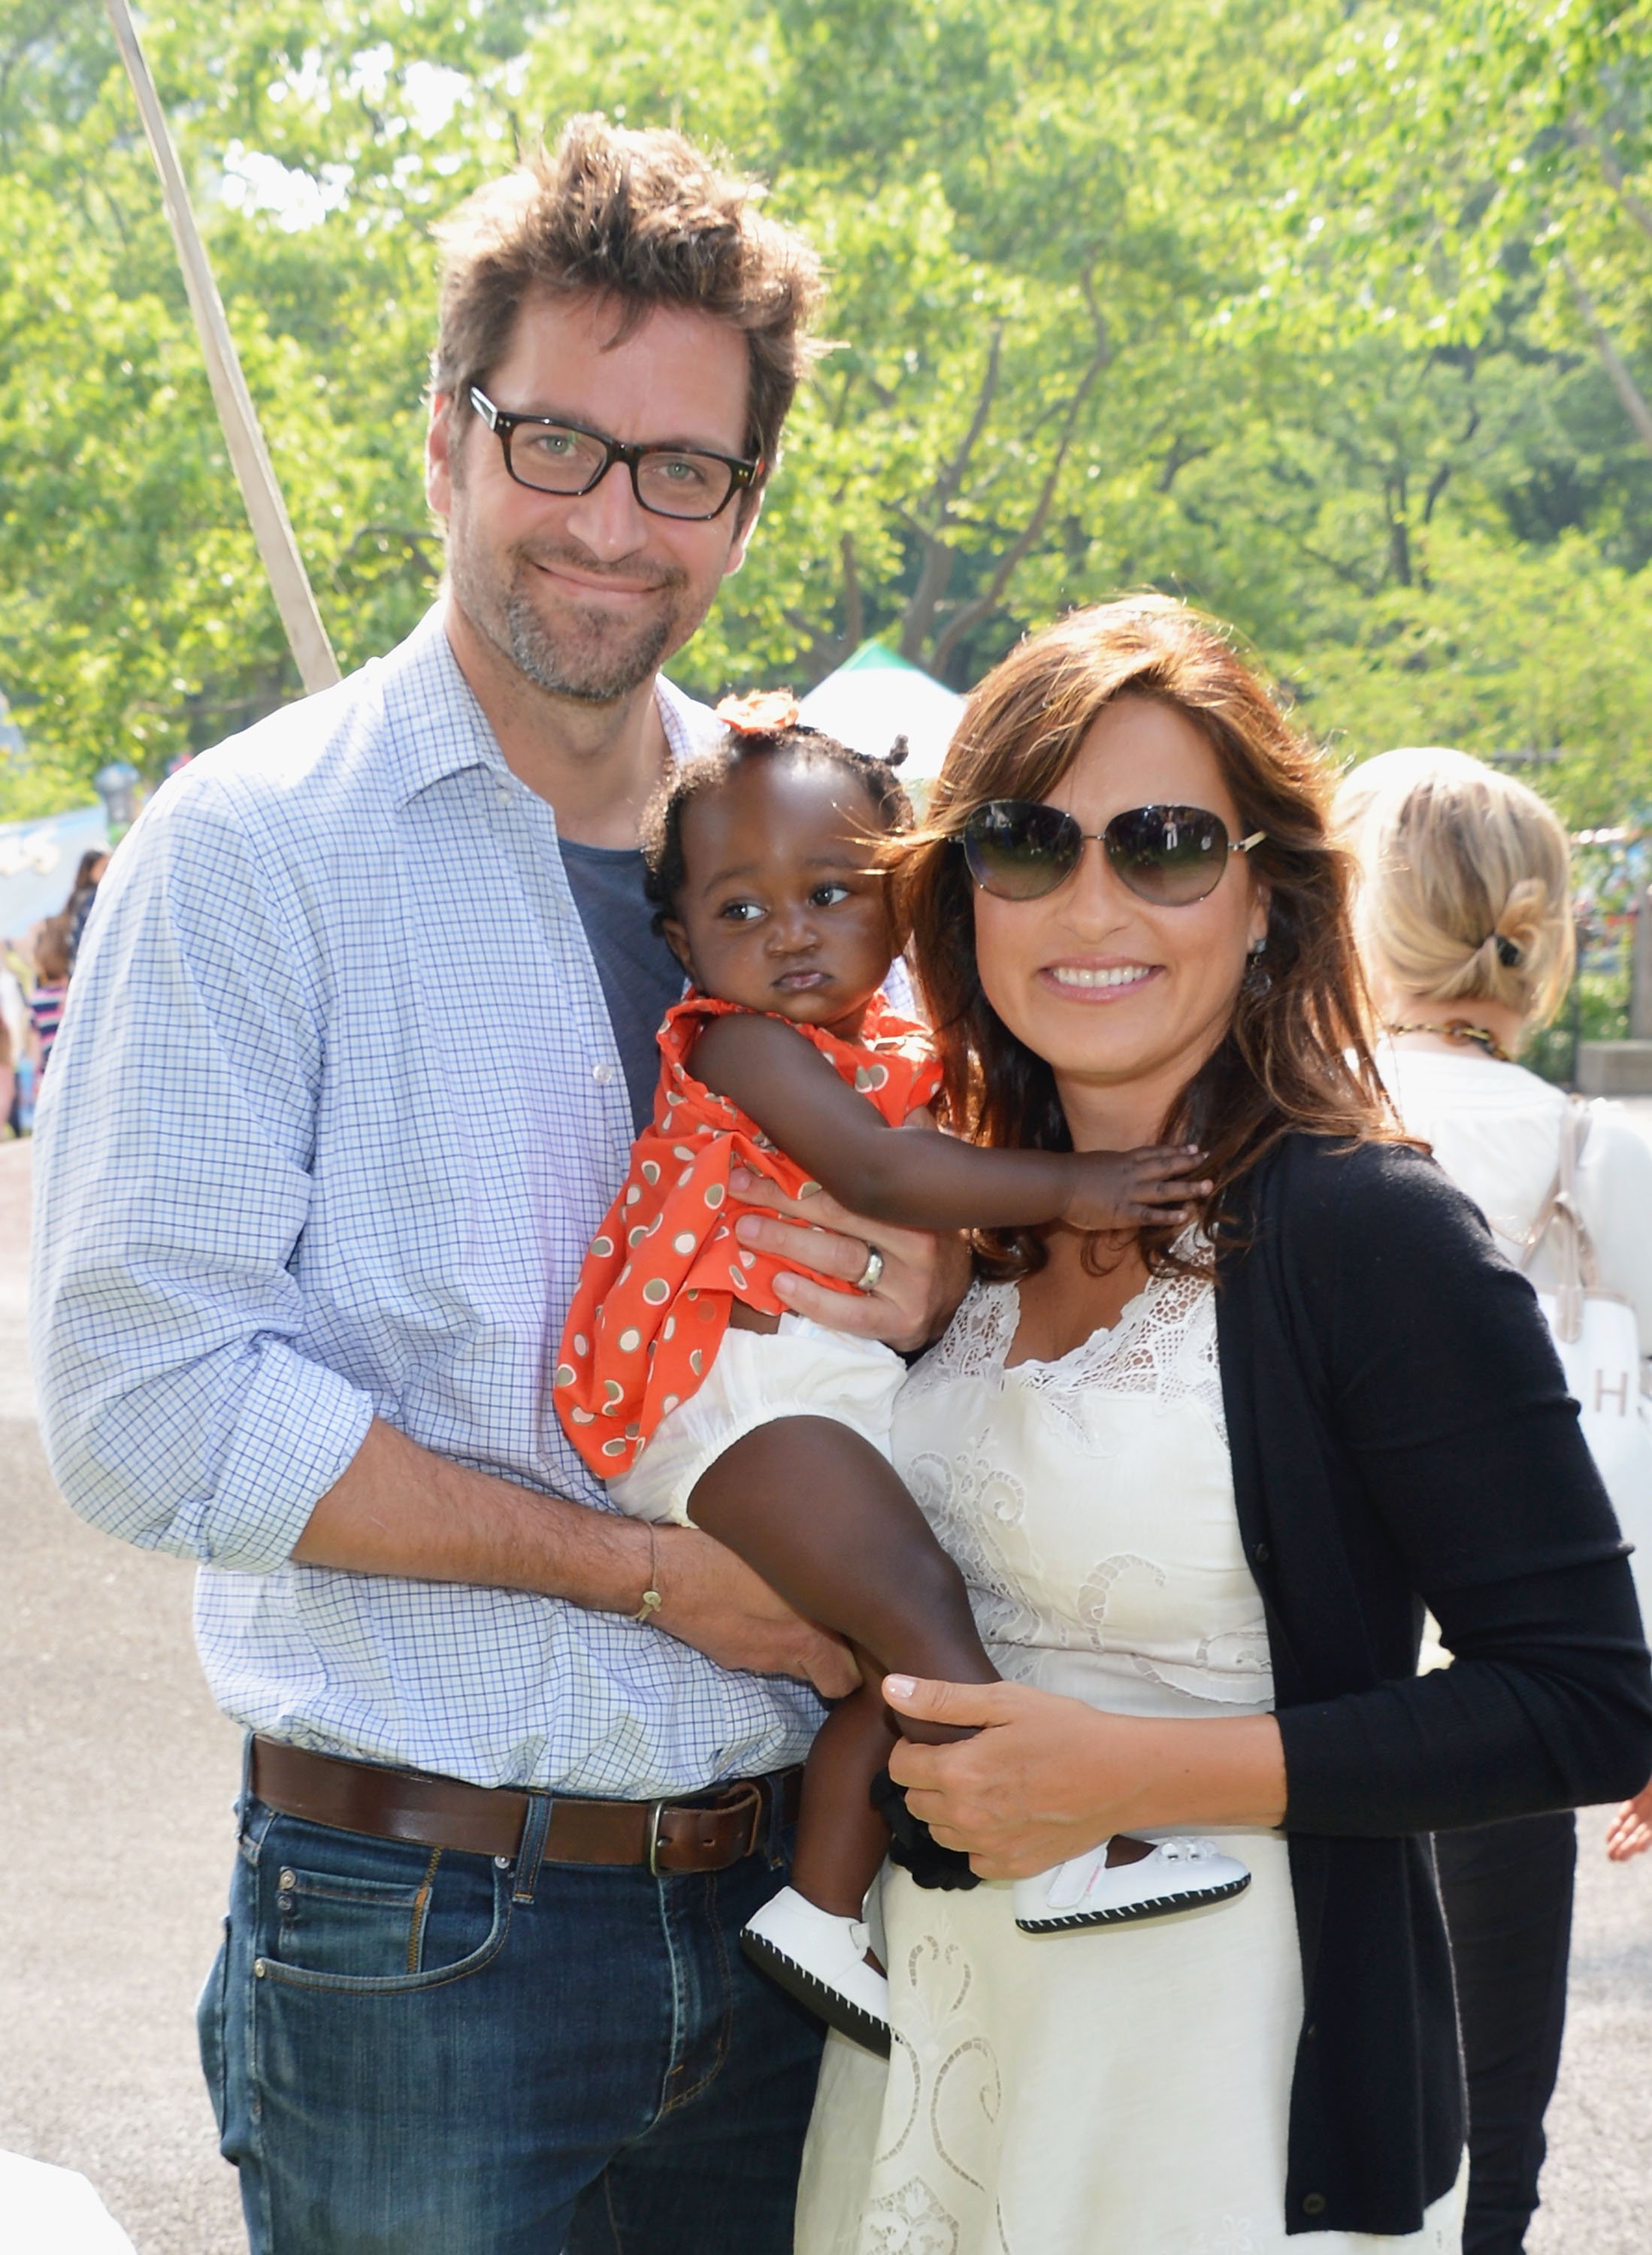 Peter Hermann, Mariska Hargitay, and Amaya Josephine at Central Park, Heckscher Softball Fields on May 23, 2012 in New York City | Source: Getty Images